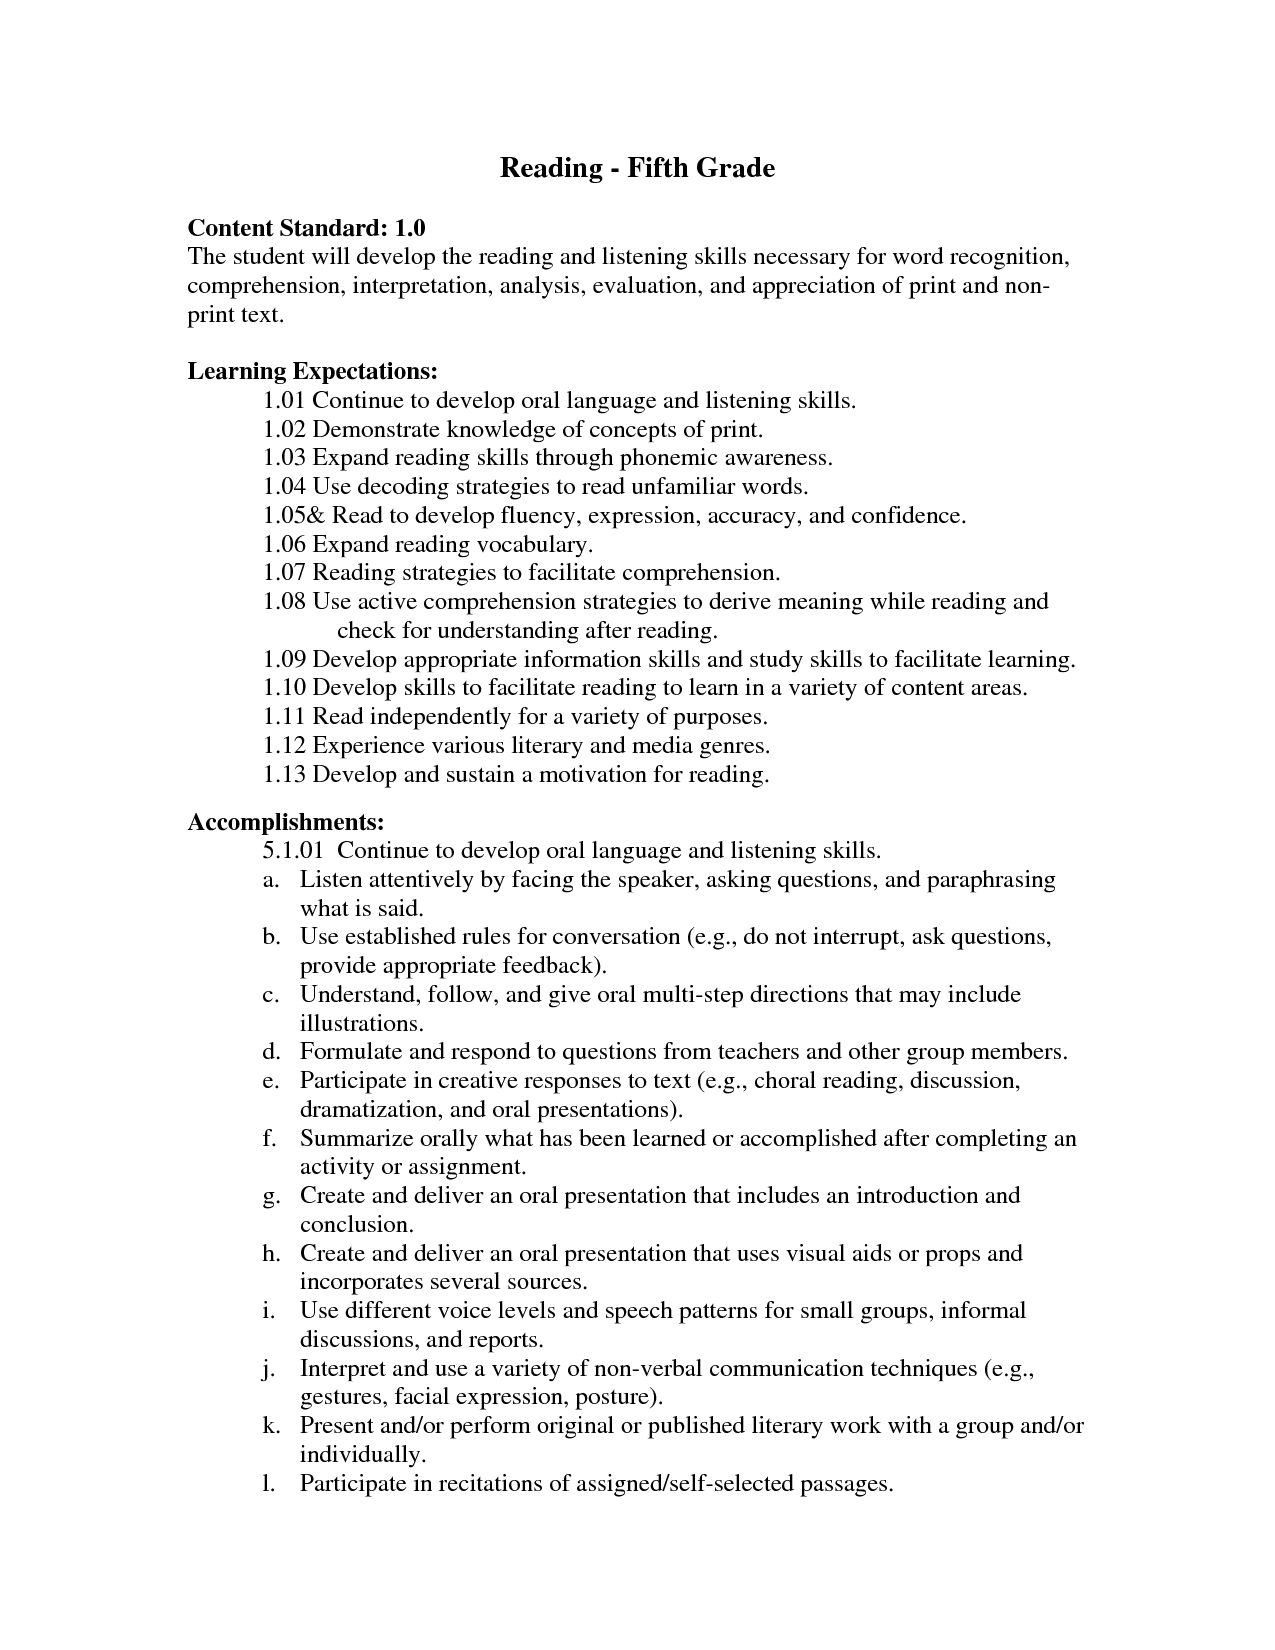 18-best-images-of-health-grade-5-english-worksheets-5th-grade-english